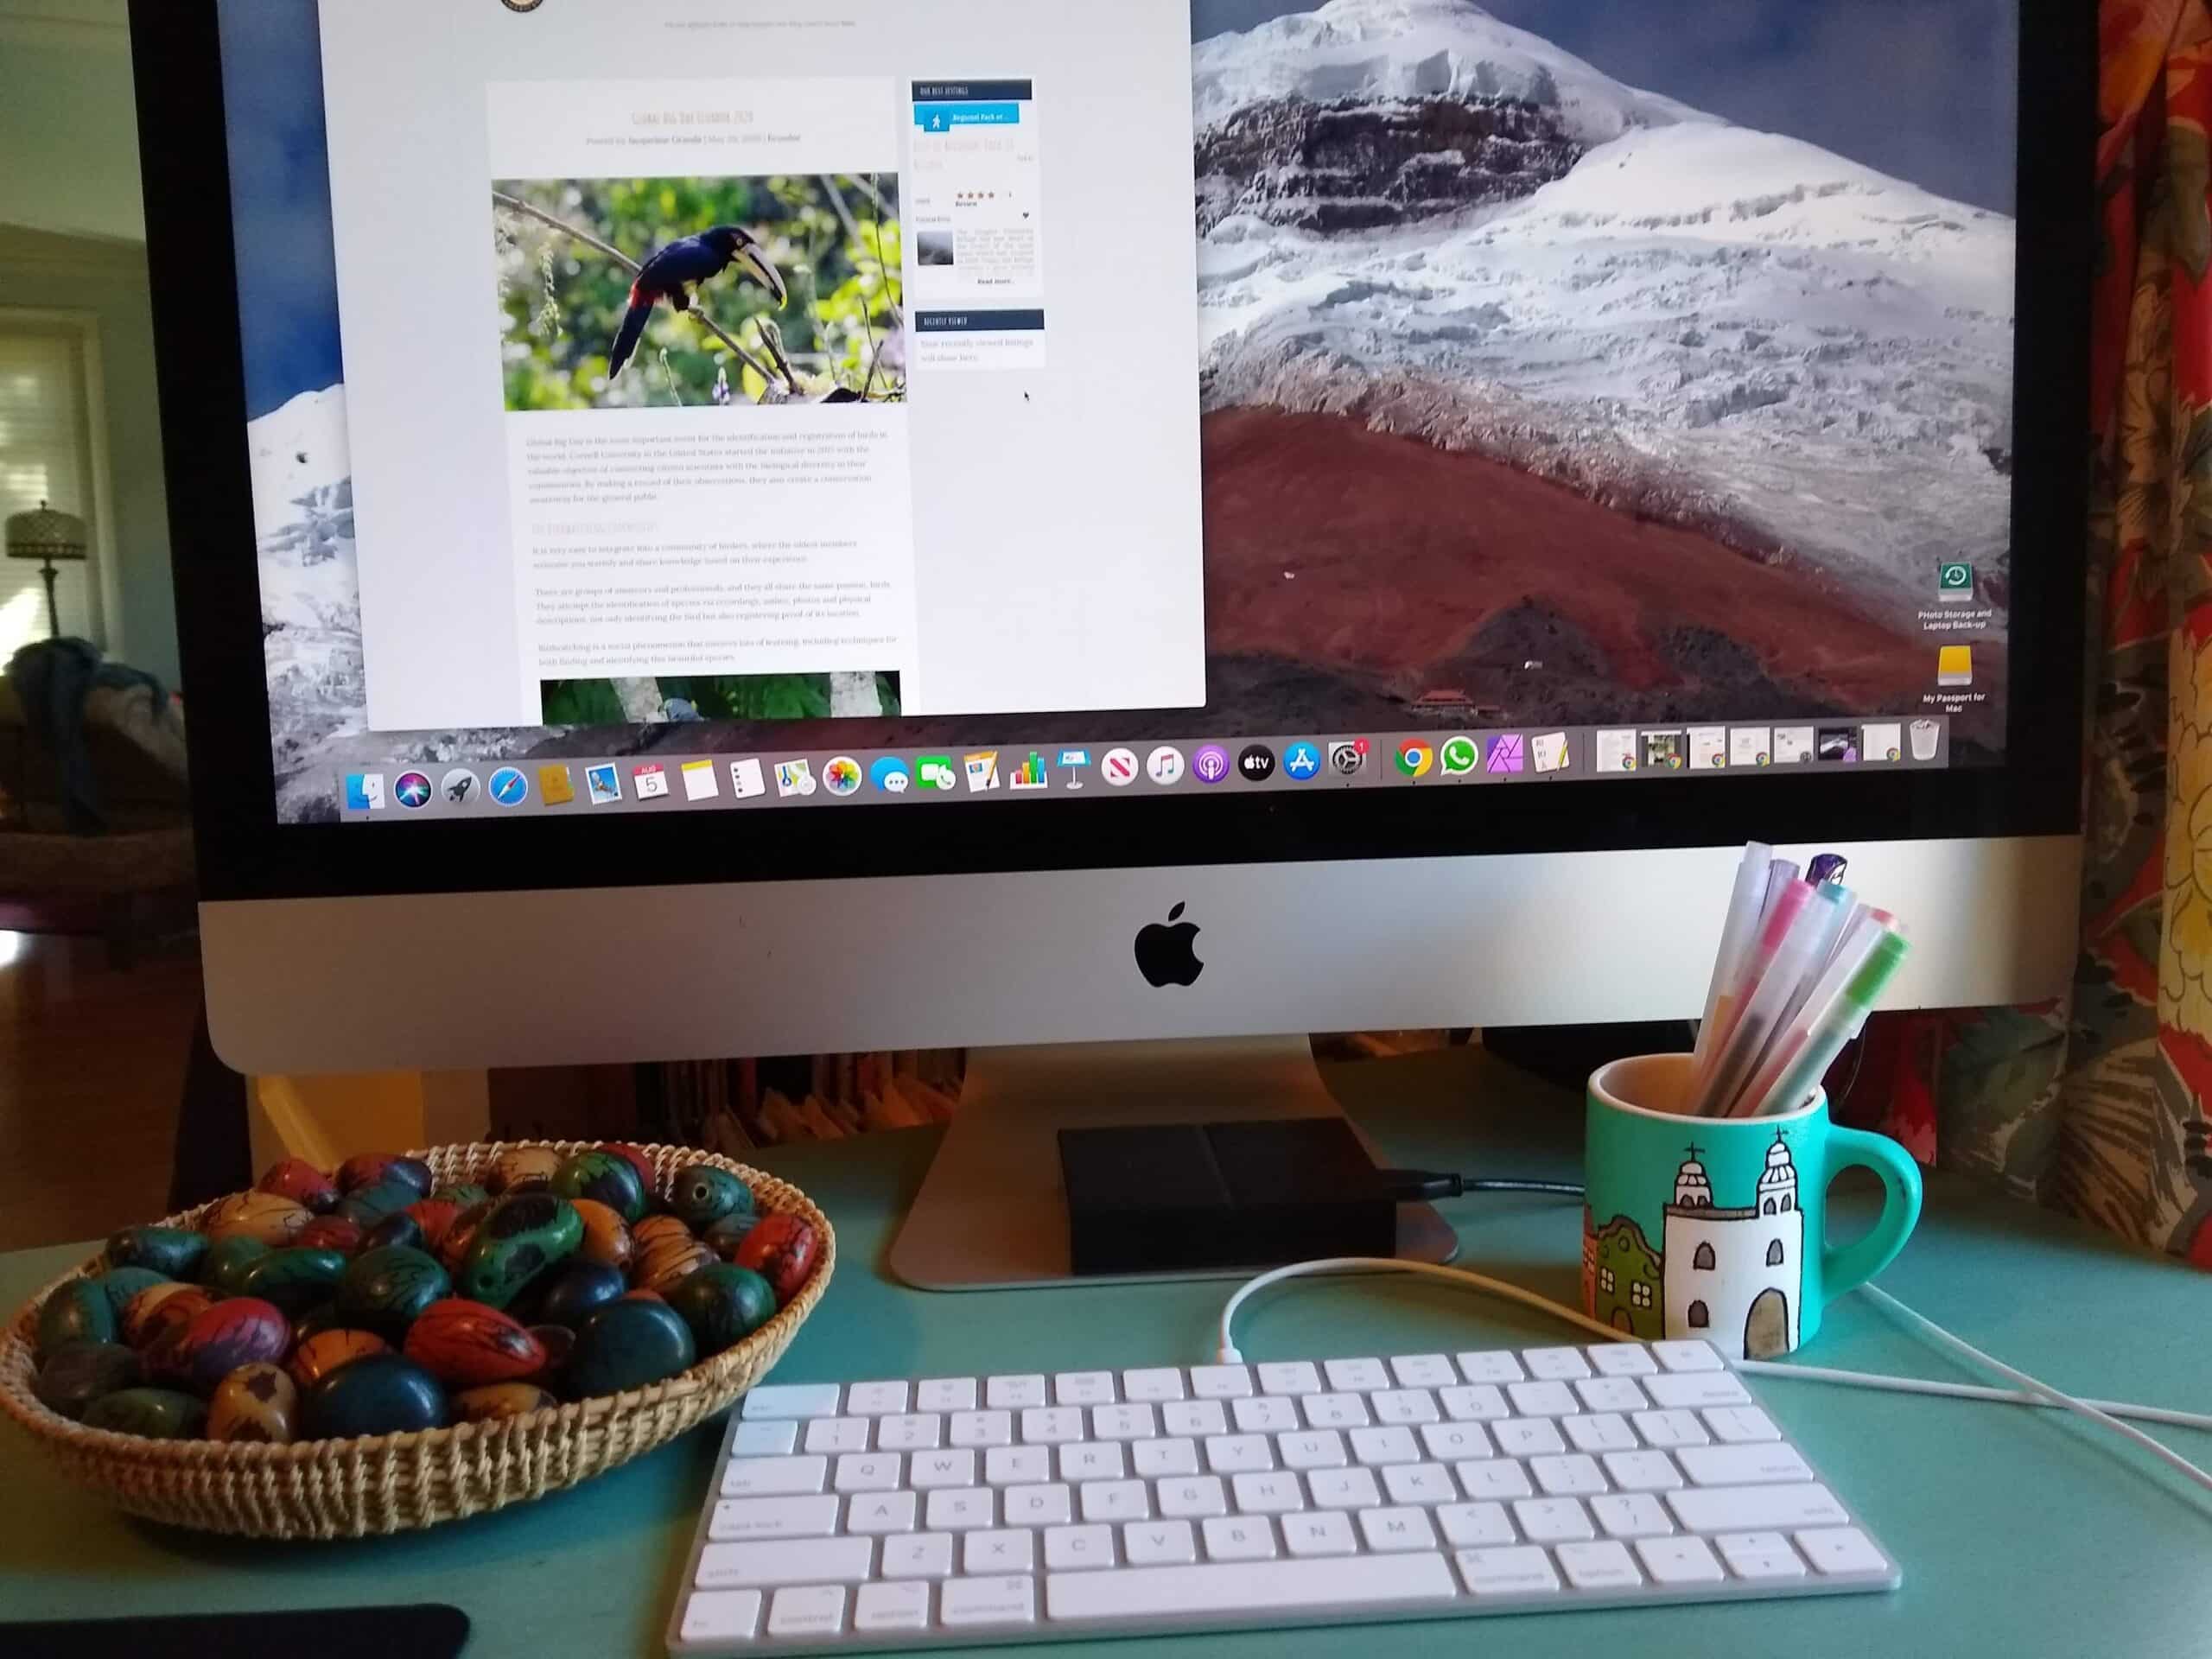 computer showing Cotopaxi Volcano and open blog post from Not Your Average American